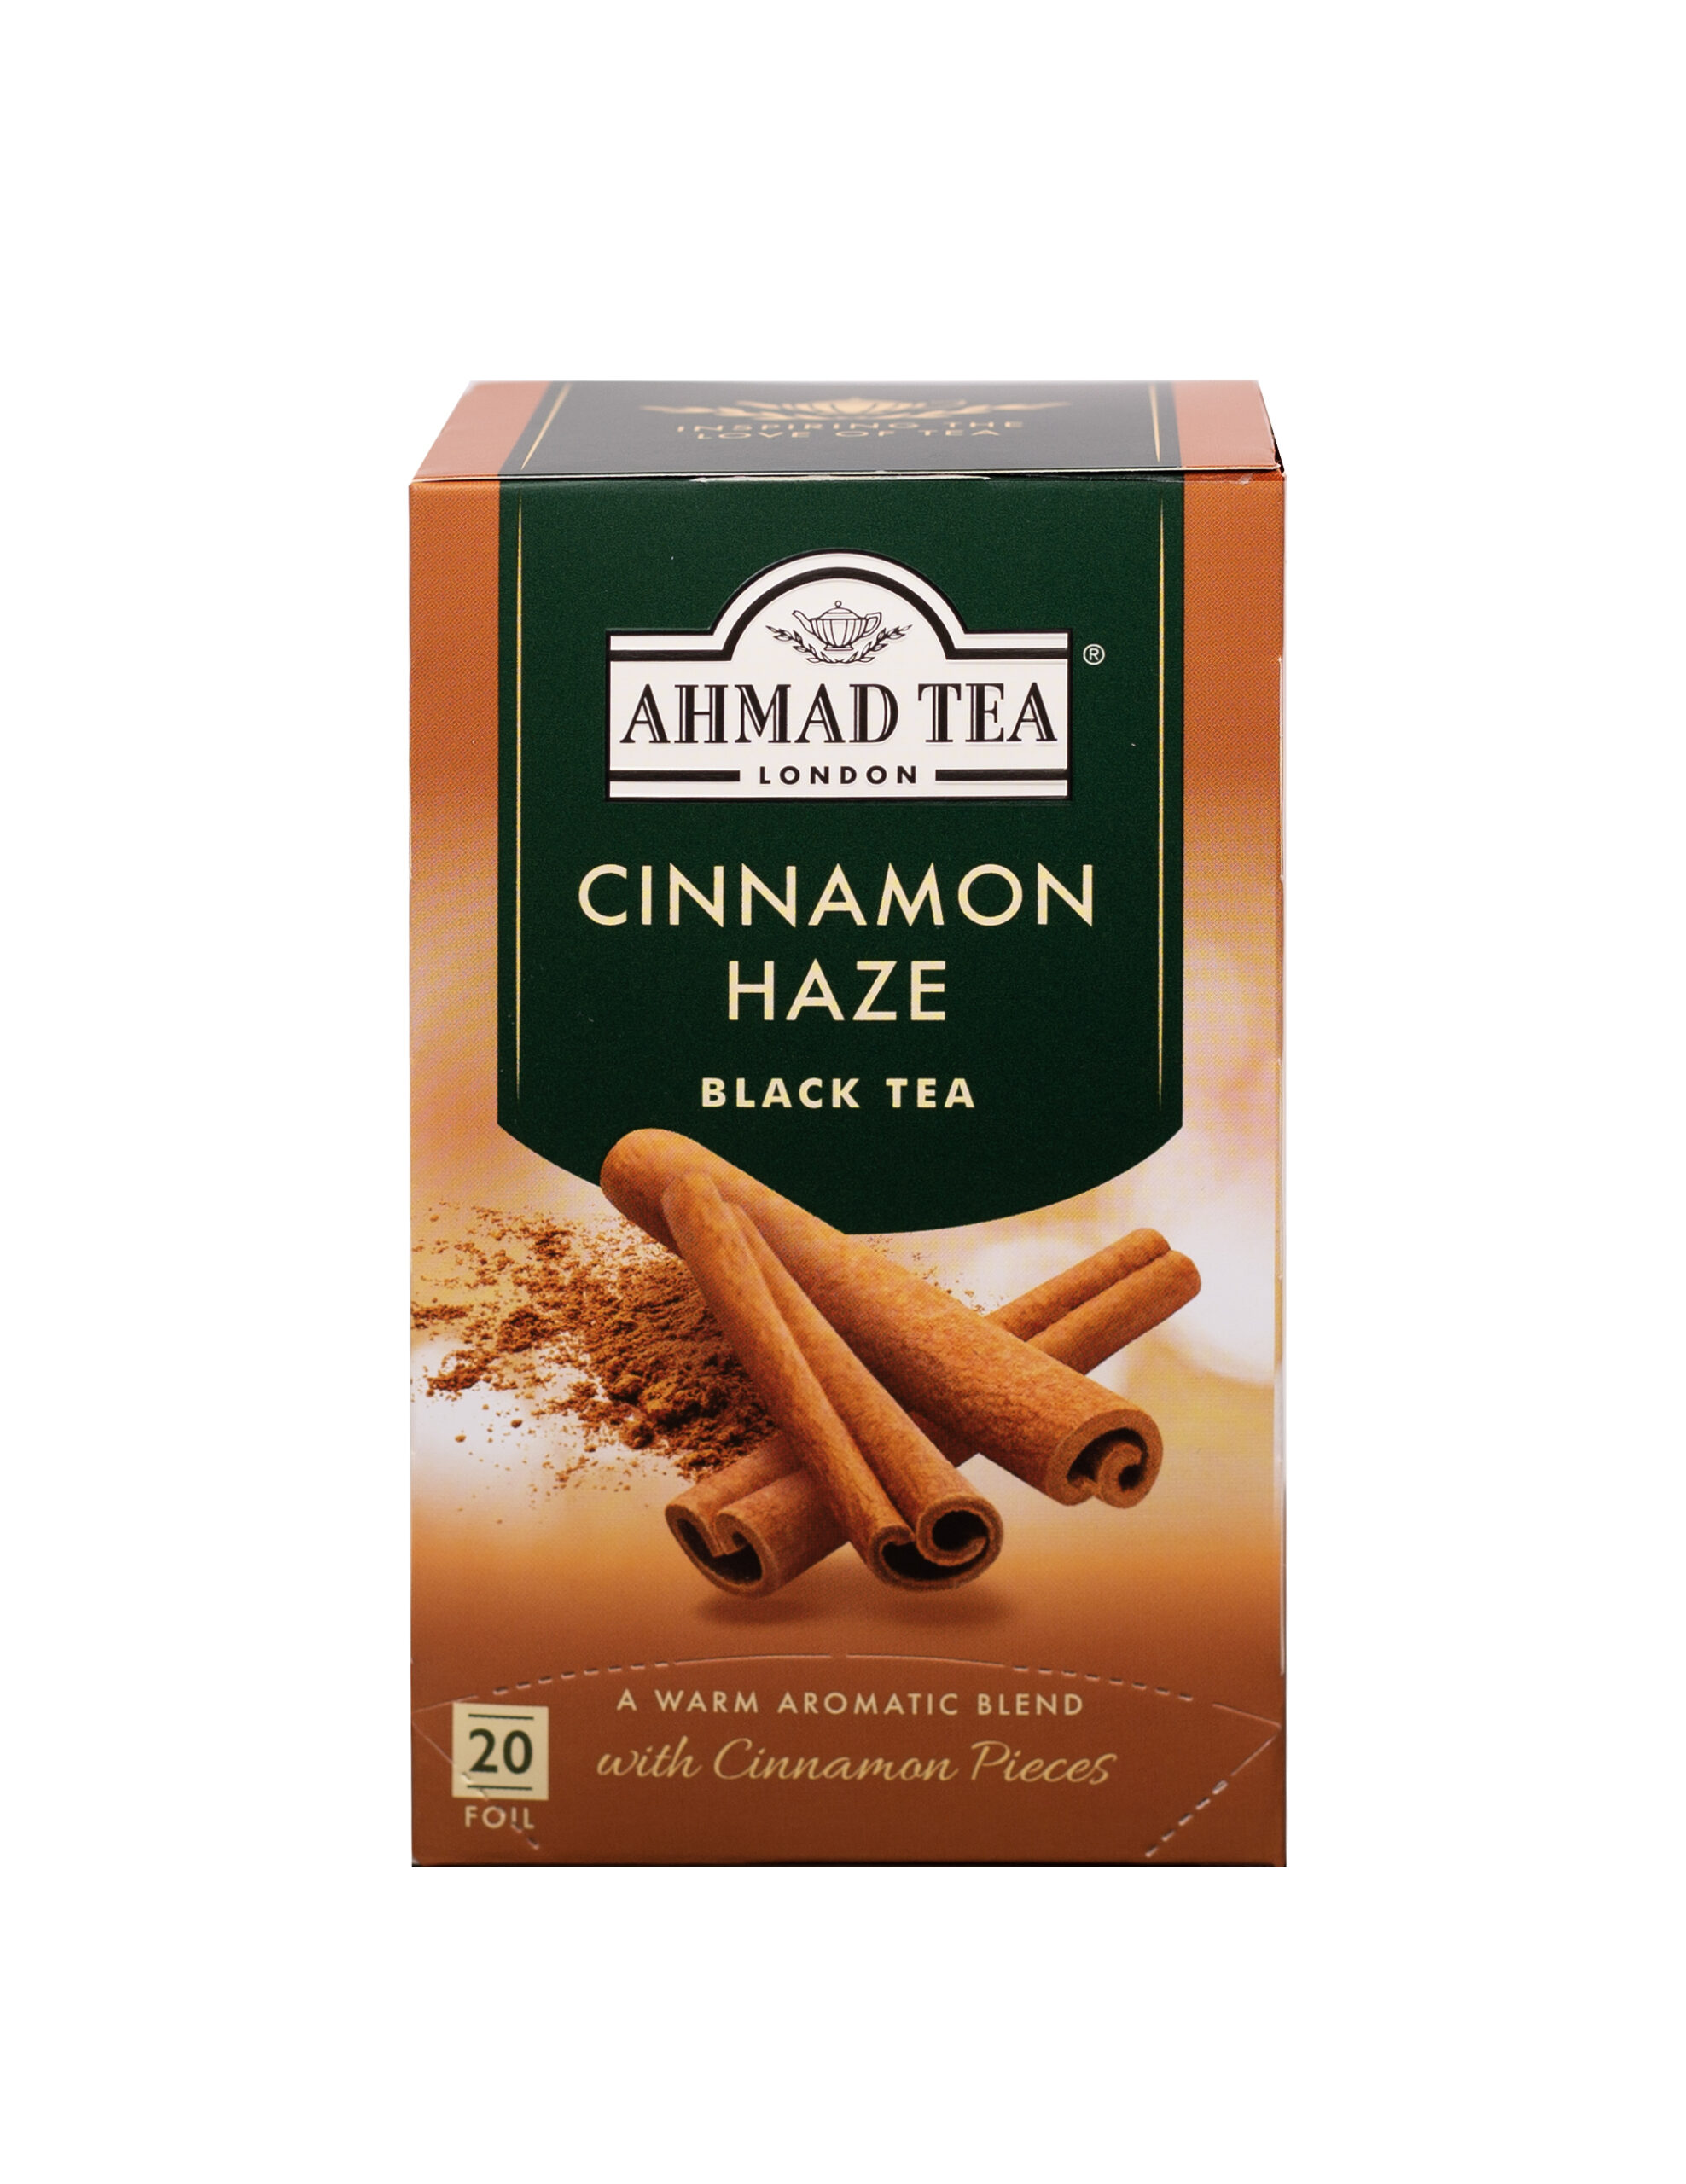 Picture is of the front face of the Cinnamon Haze packet